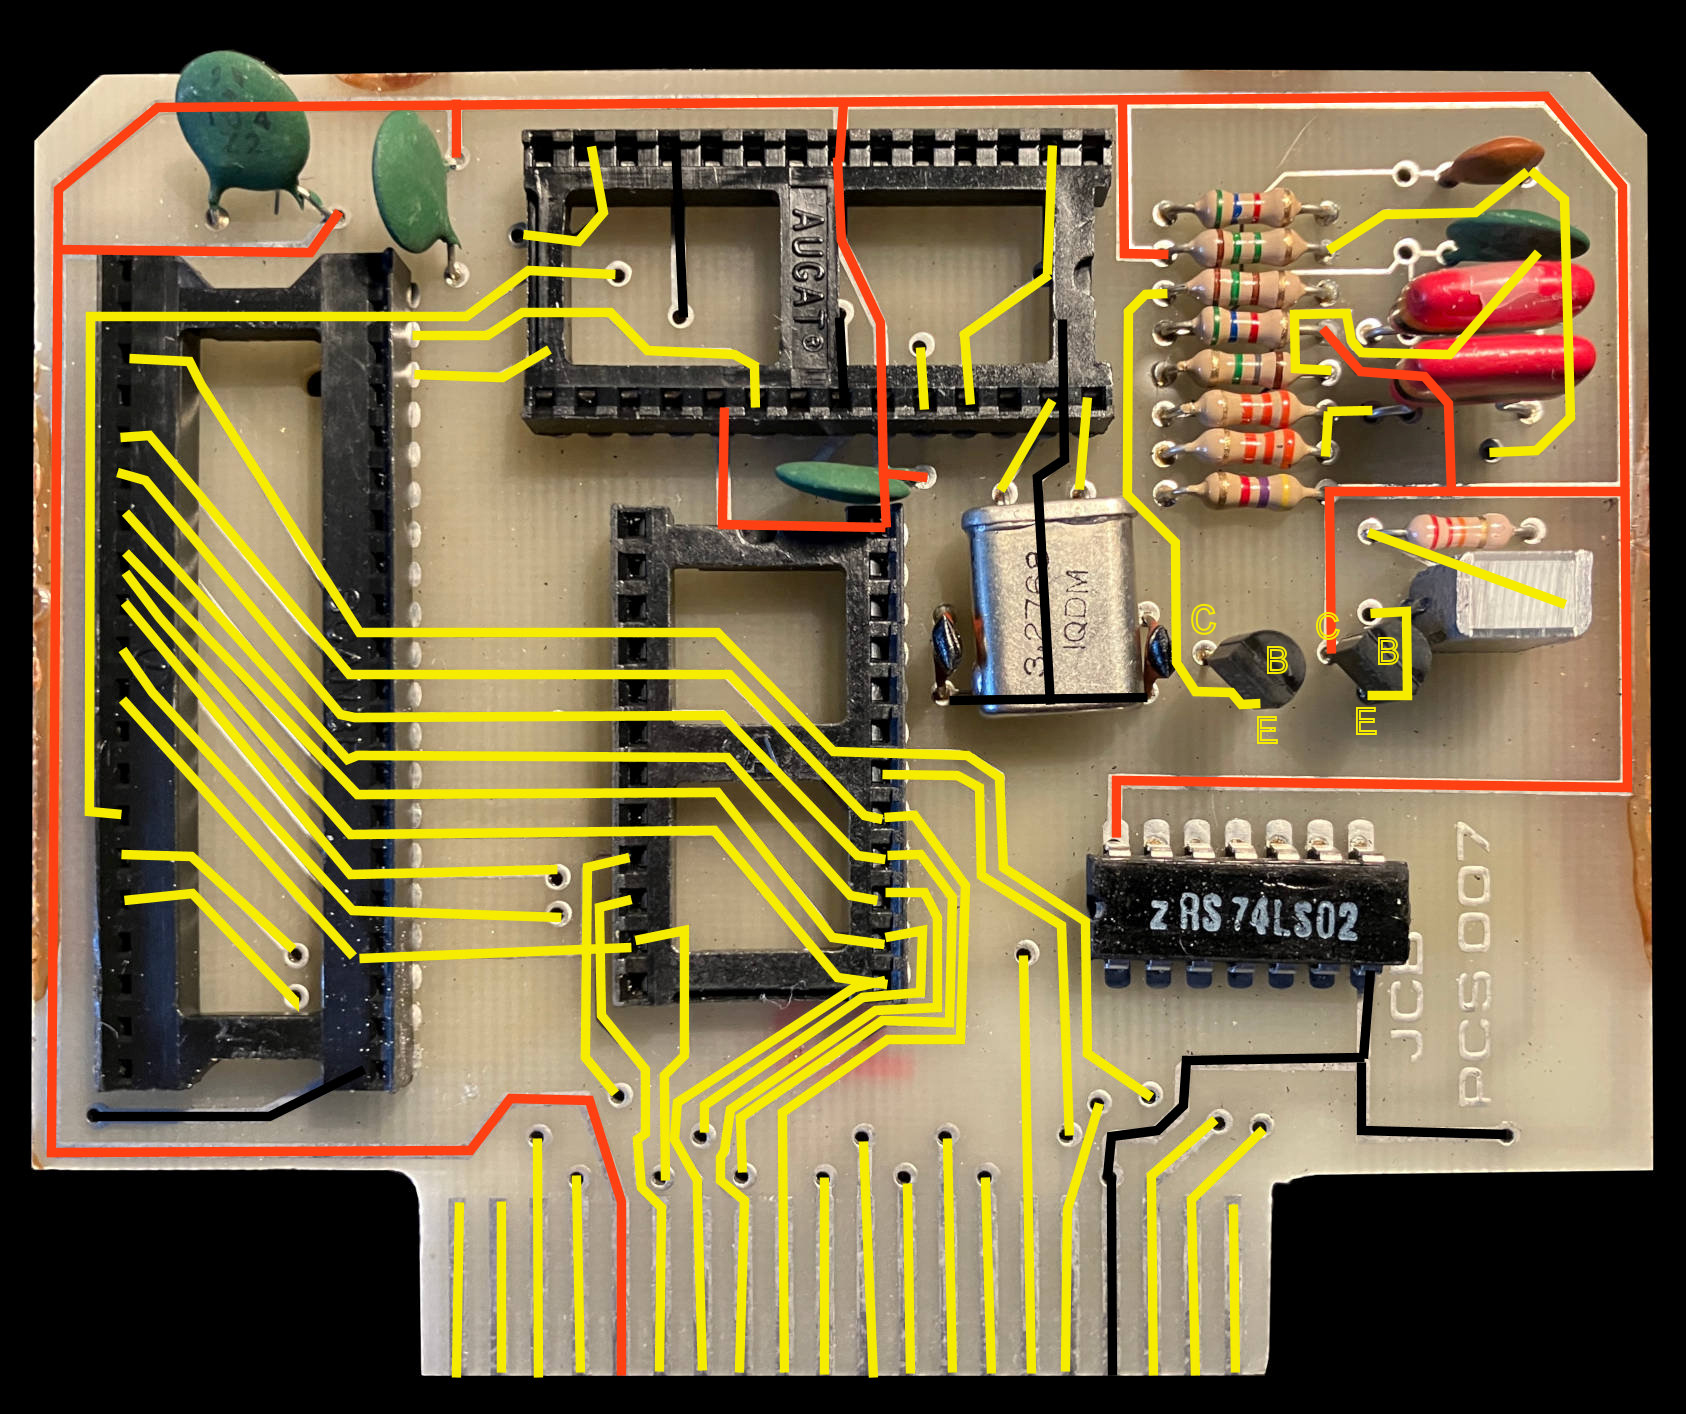 JCB_Speech_Synthesis_Module_PCB_Top_Unpopulated.jpg